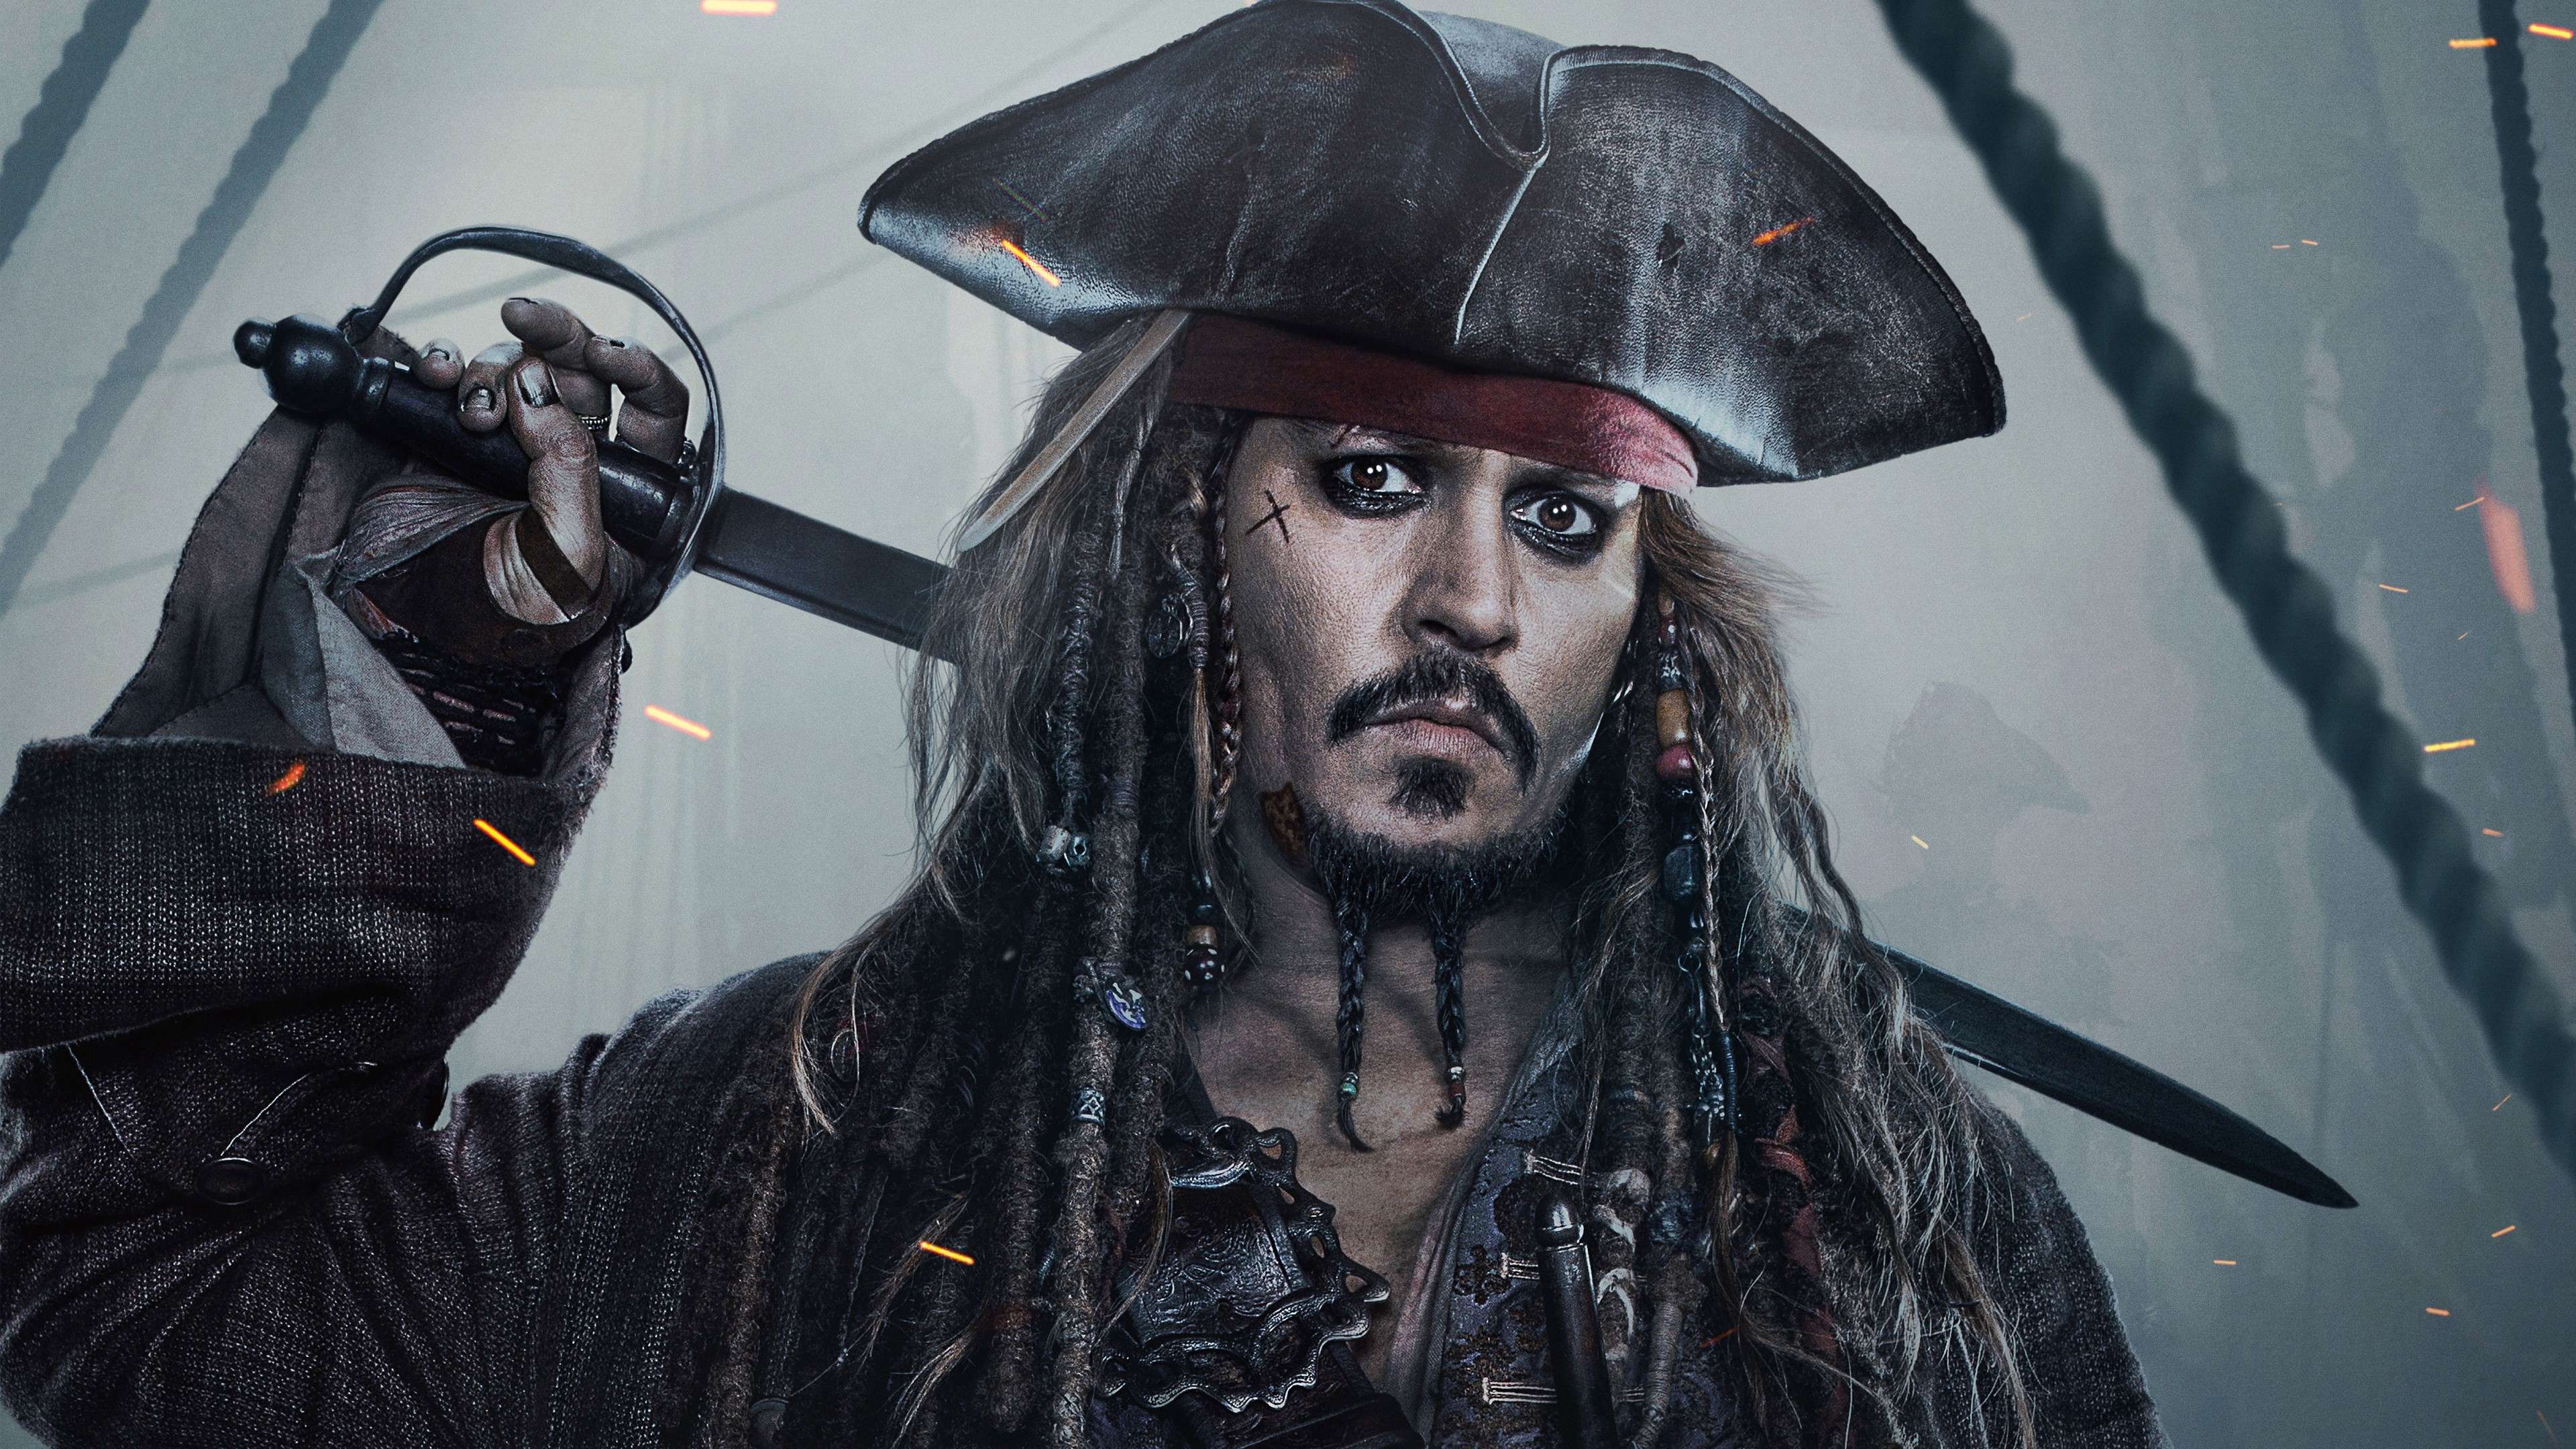 Johnny Depp’s Departure From The Pirates Franchise Saves The Studios A Substantial Amount Of Money